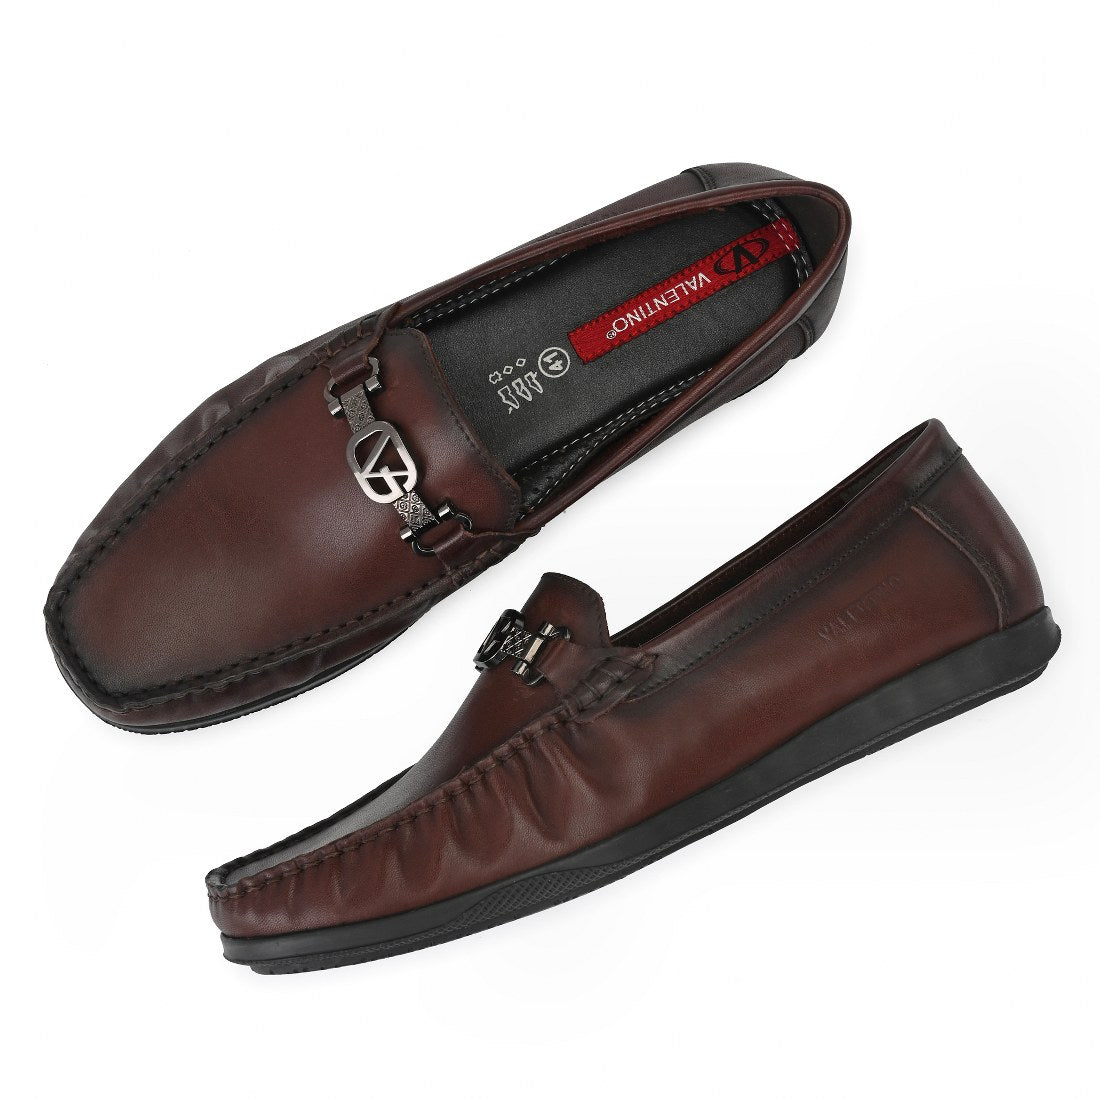 V-CLASS-11 MEN LEATHER BROWN CASUAL SLIP ON LOAFER